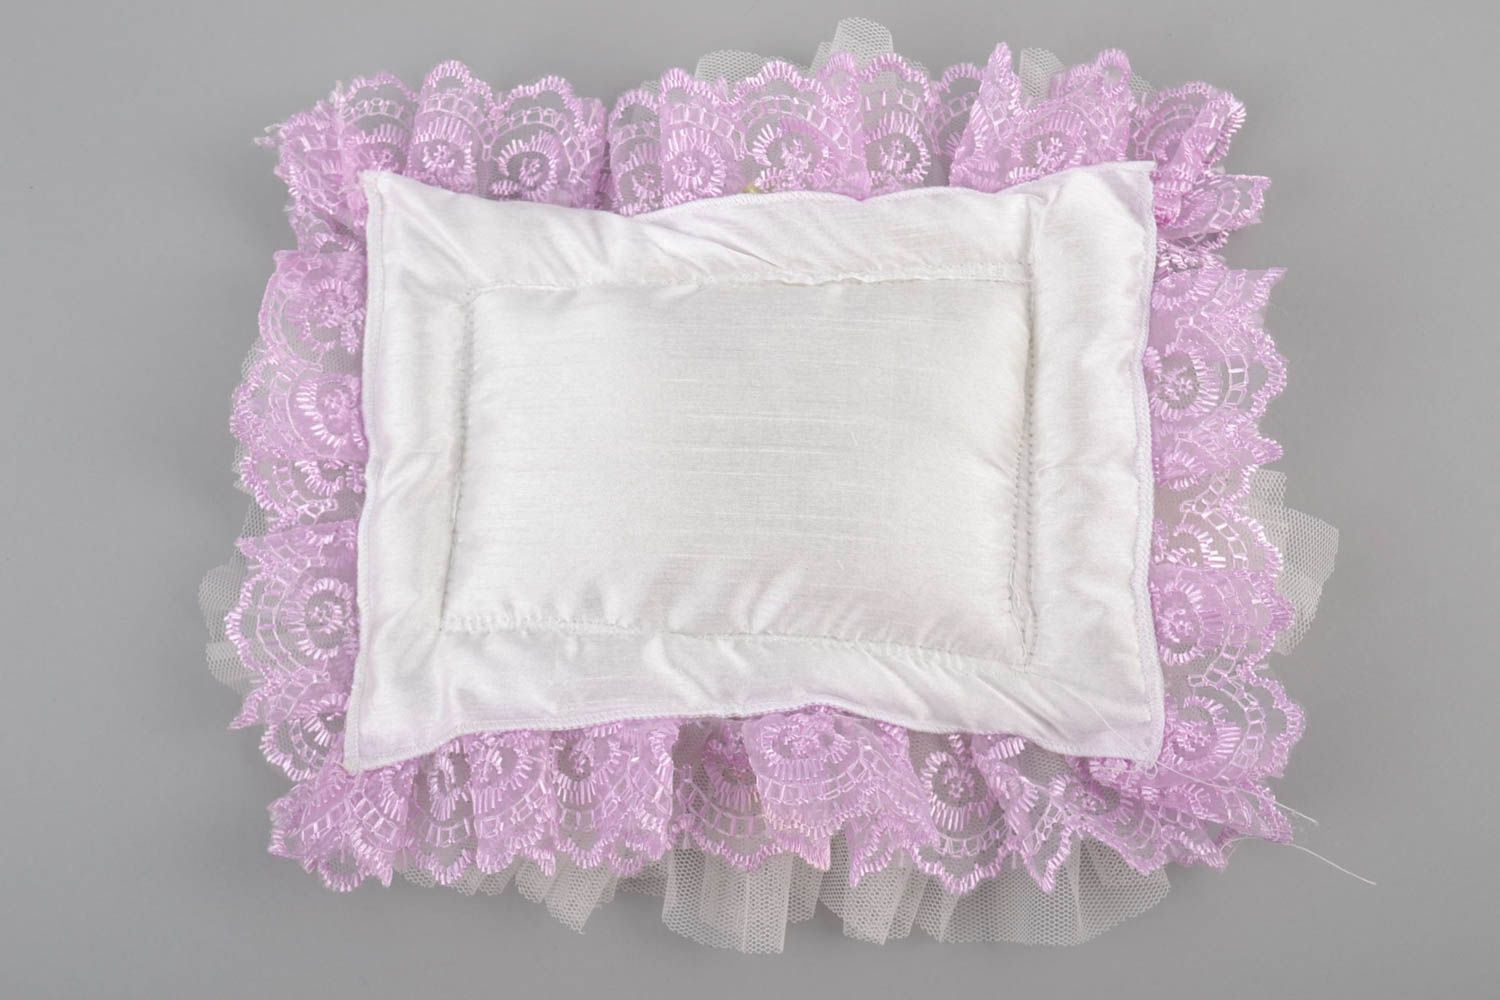 Handmade beautiful fluffy white and violet cute wedding pillow for rings  photo 3